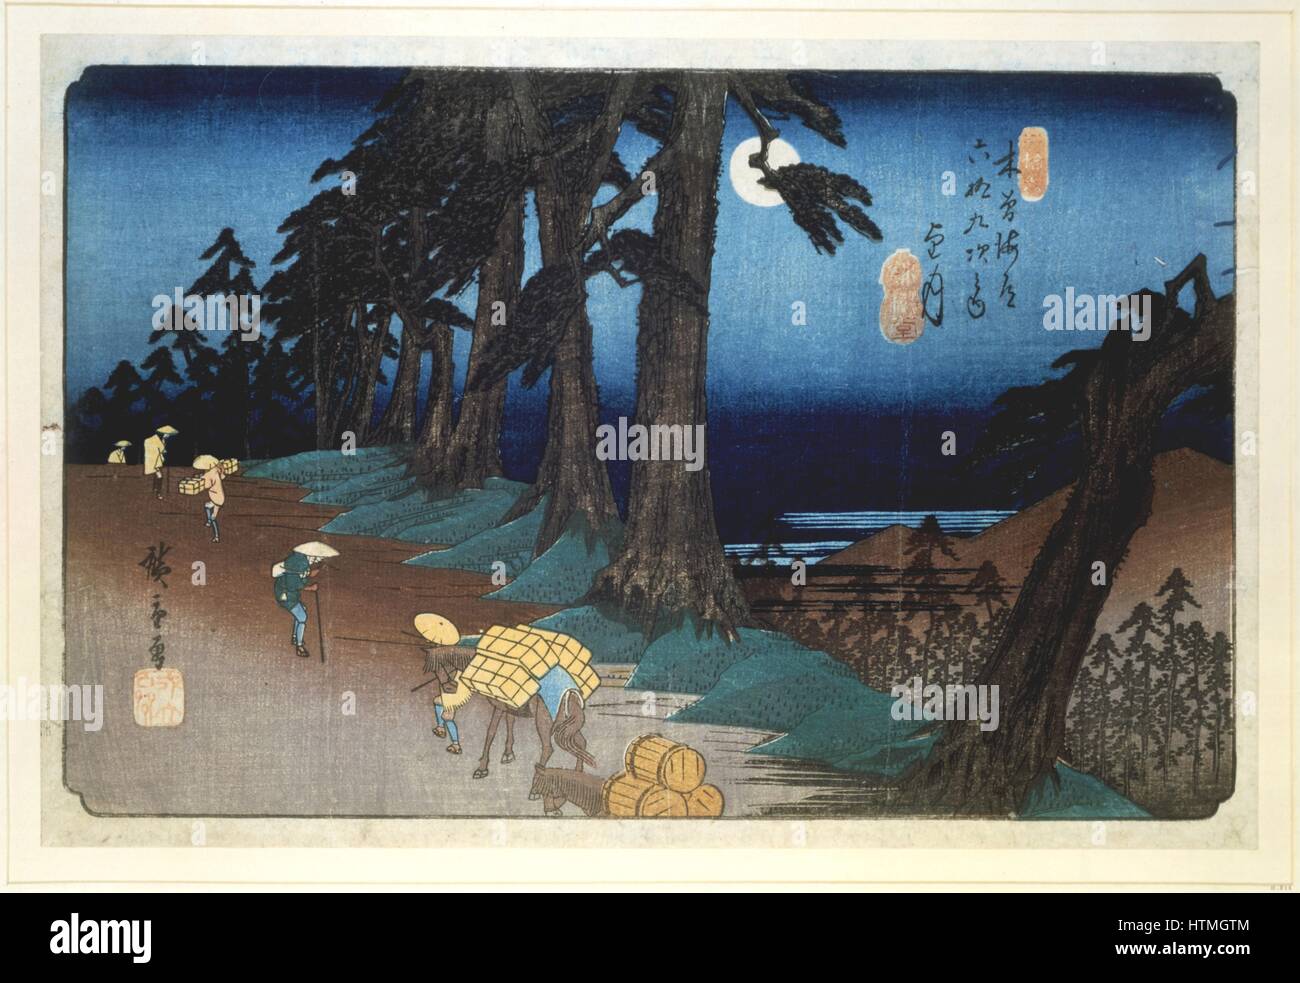 Mochizuki: Full Moon. From 'The Sixty-nine Stations of the Kisokaido Road' 1832-1834. Coloured woodblock print. Porters and pack animals transport goods along a road lined with pine trees. Ando Hiroshige also called Ando Tokutaro (1797-1858) Japanese artist and printmaker. Stock Photo